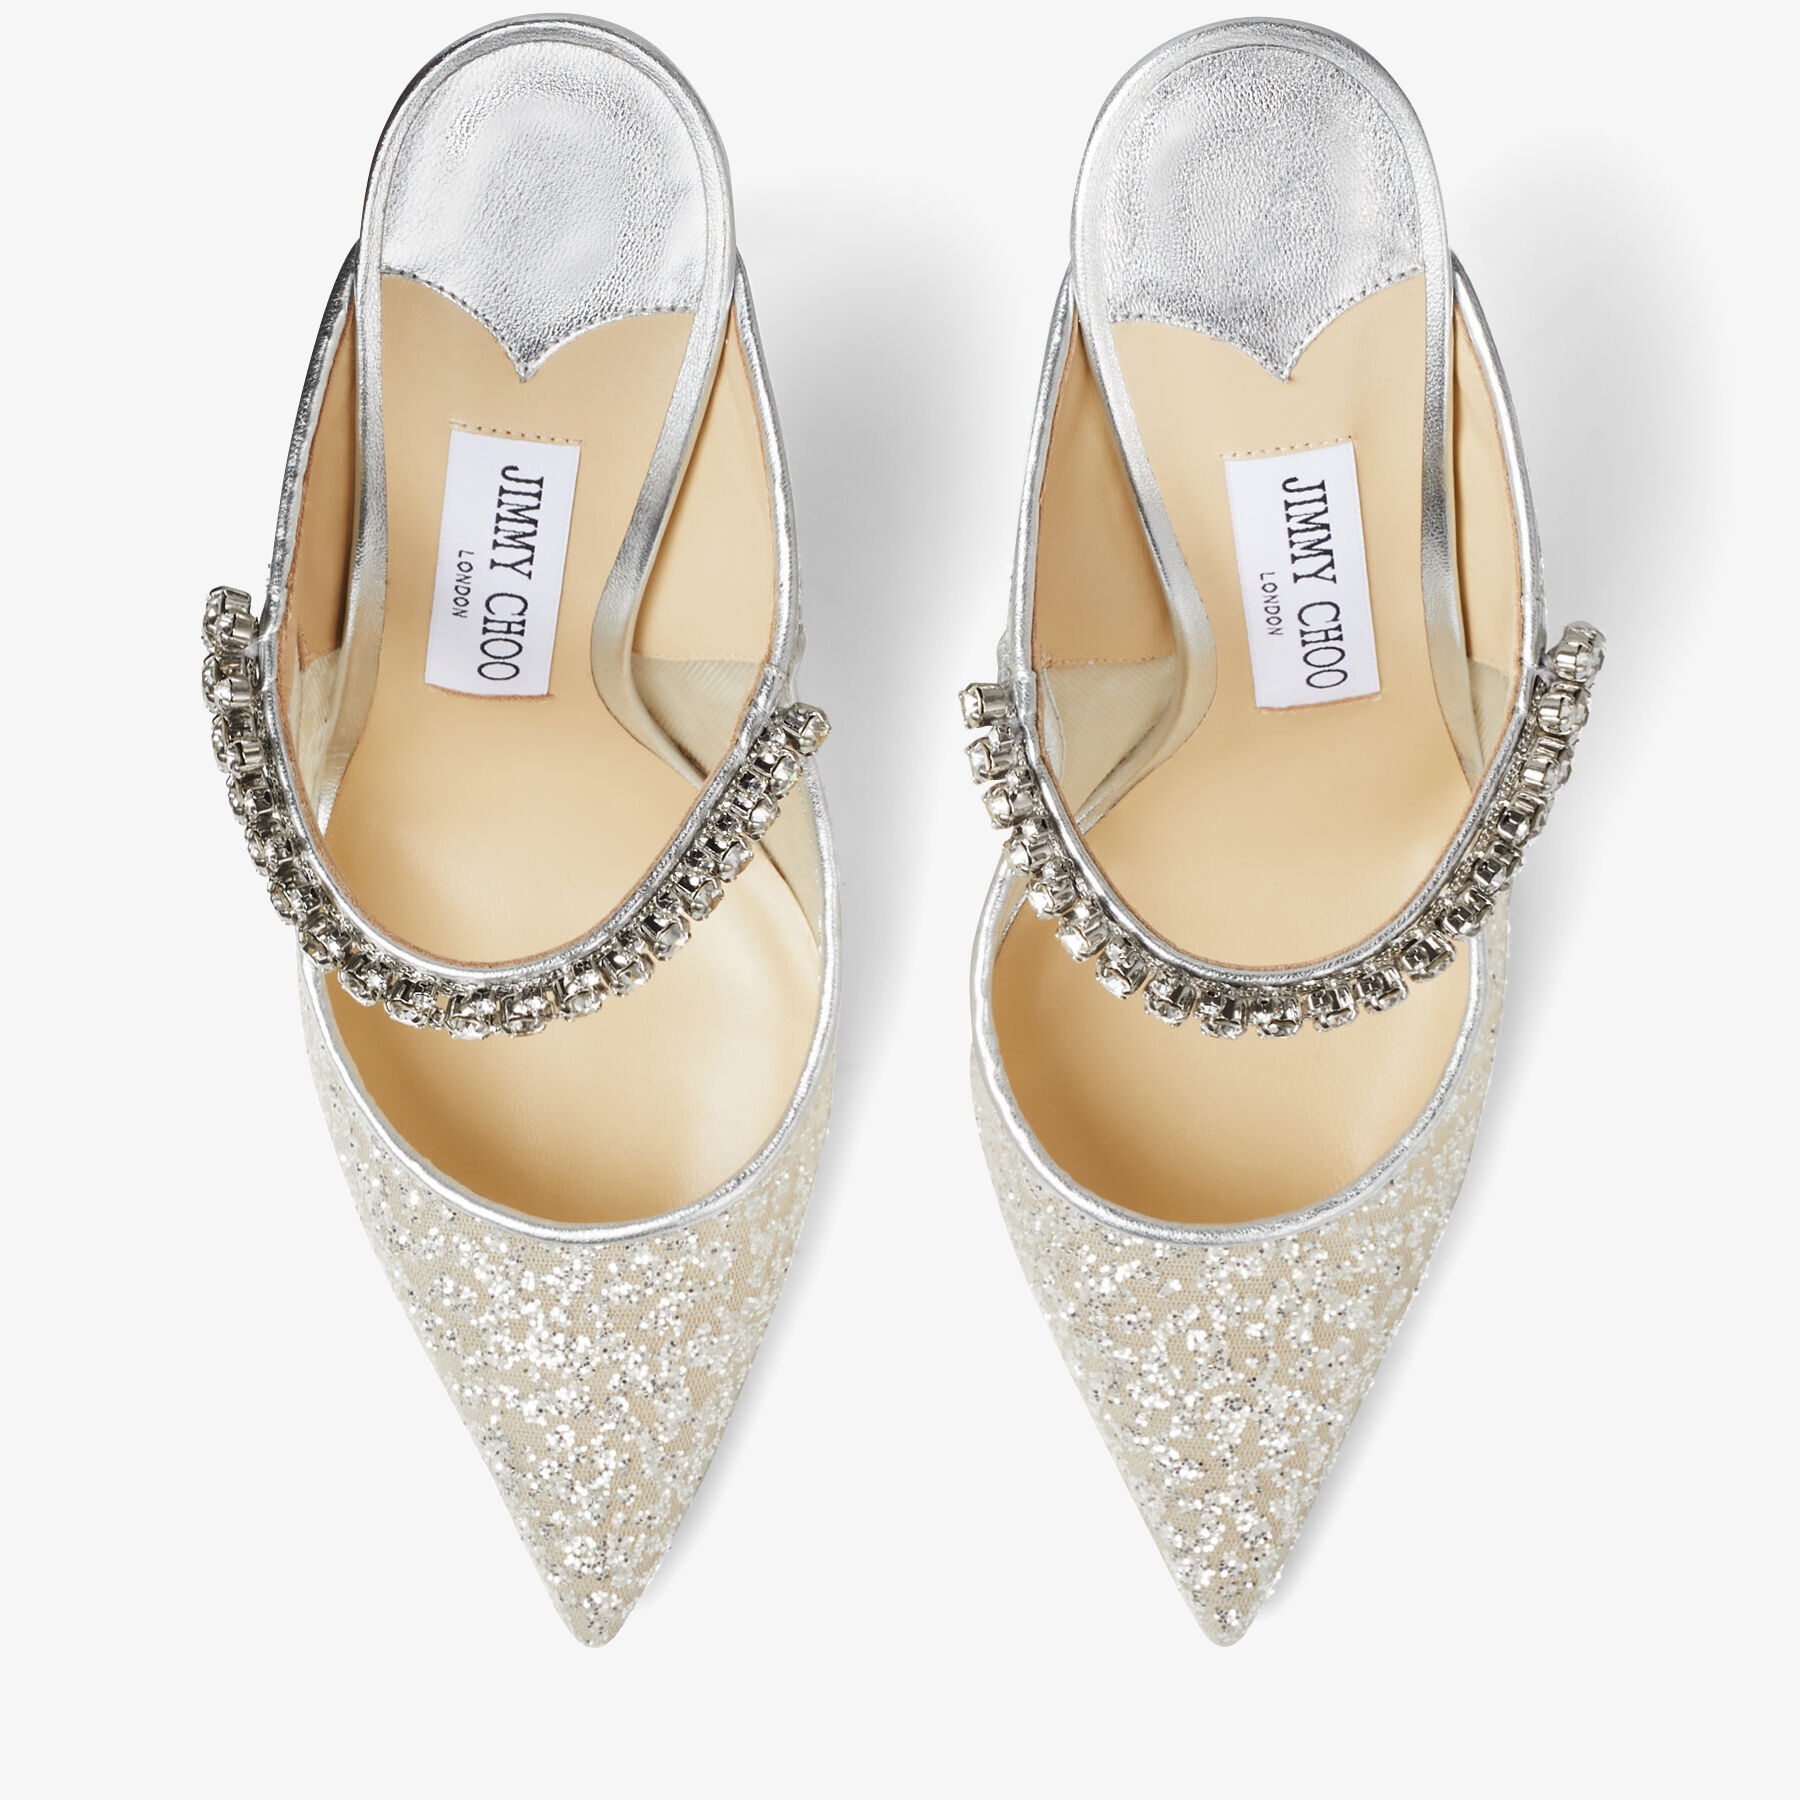 Bing 100
Silver Glitter Tulle Mules with Crystal Strap - 6